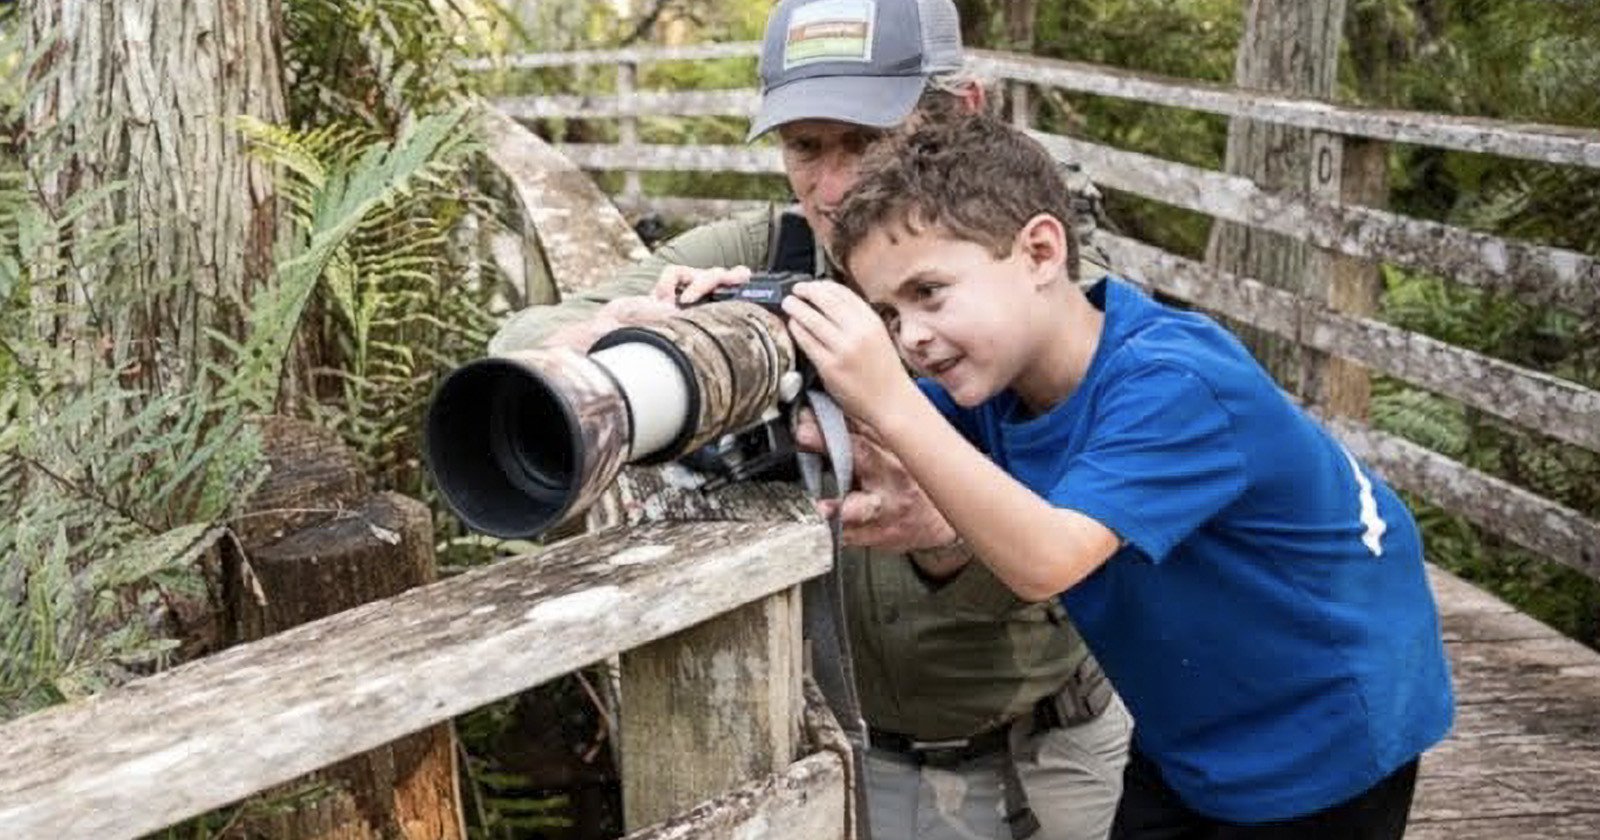  8-year-old boy becomes nat geo photographer day 